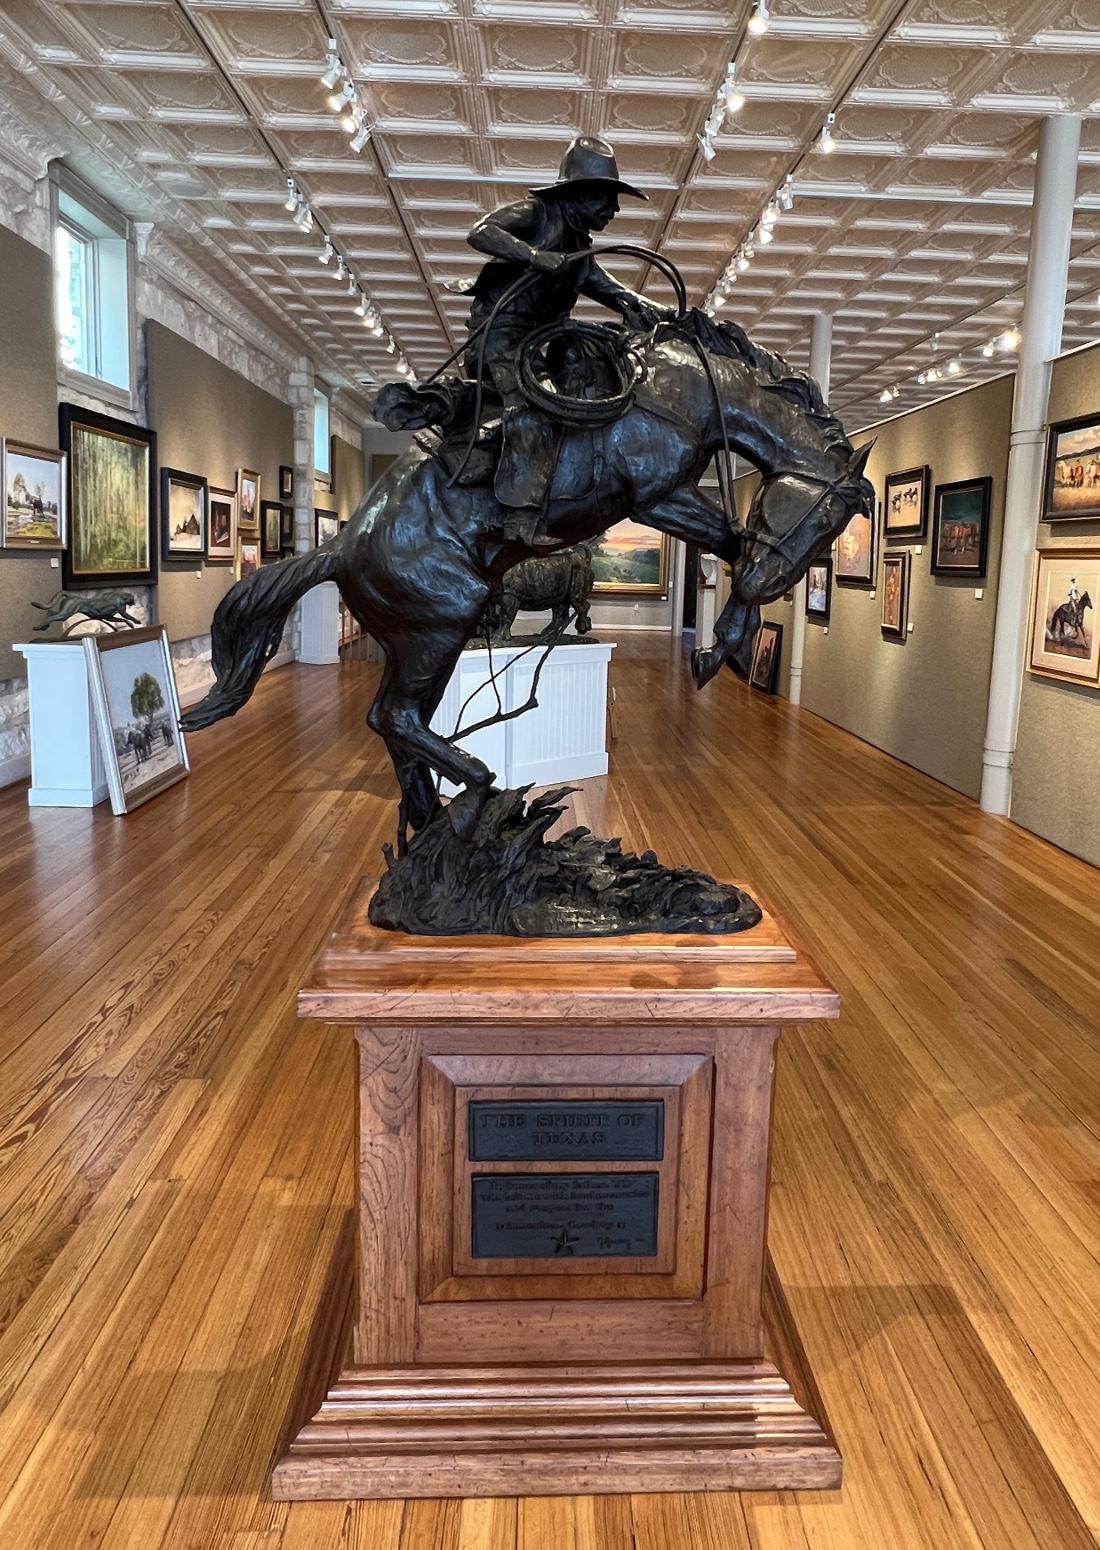 G. Harvey Figurative Sculpture - "THE SPIRIT OF TEXAS" 80 INCH BRONZE BUCKING BRONCO RARE WESTERN WITH STORY. 